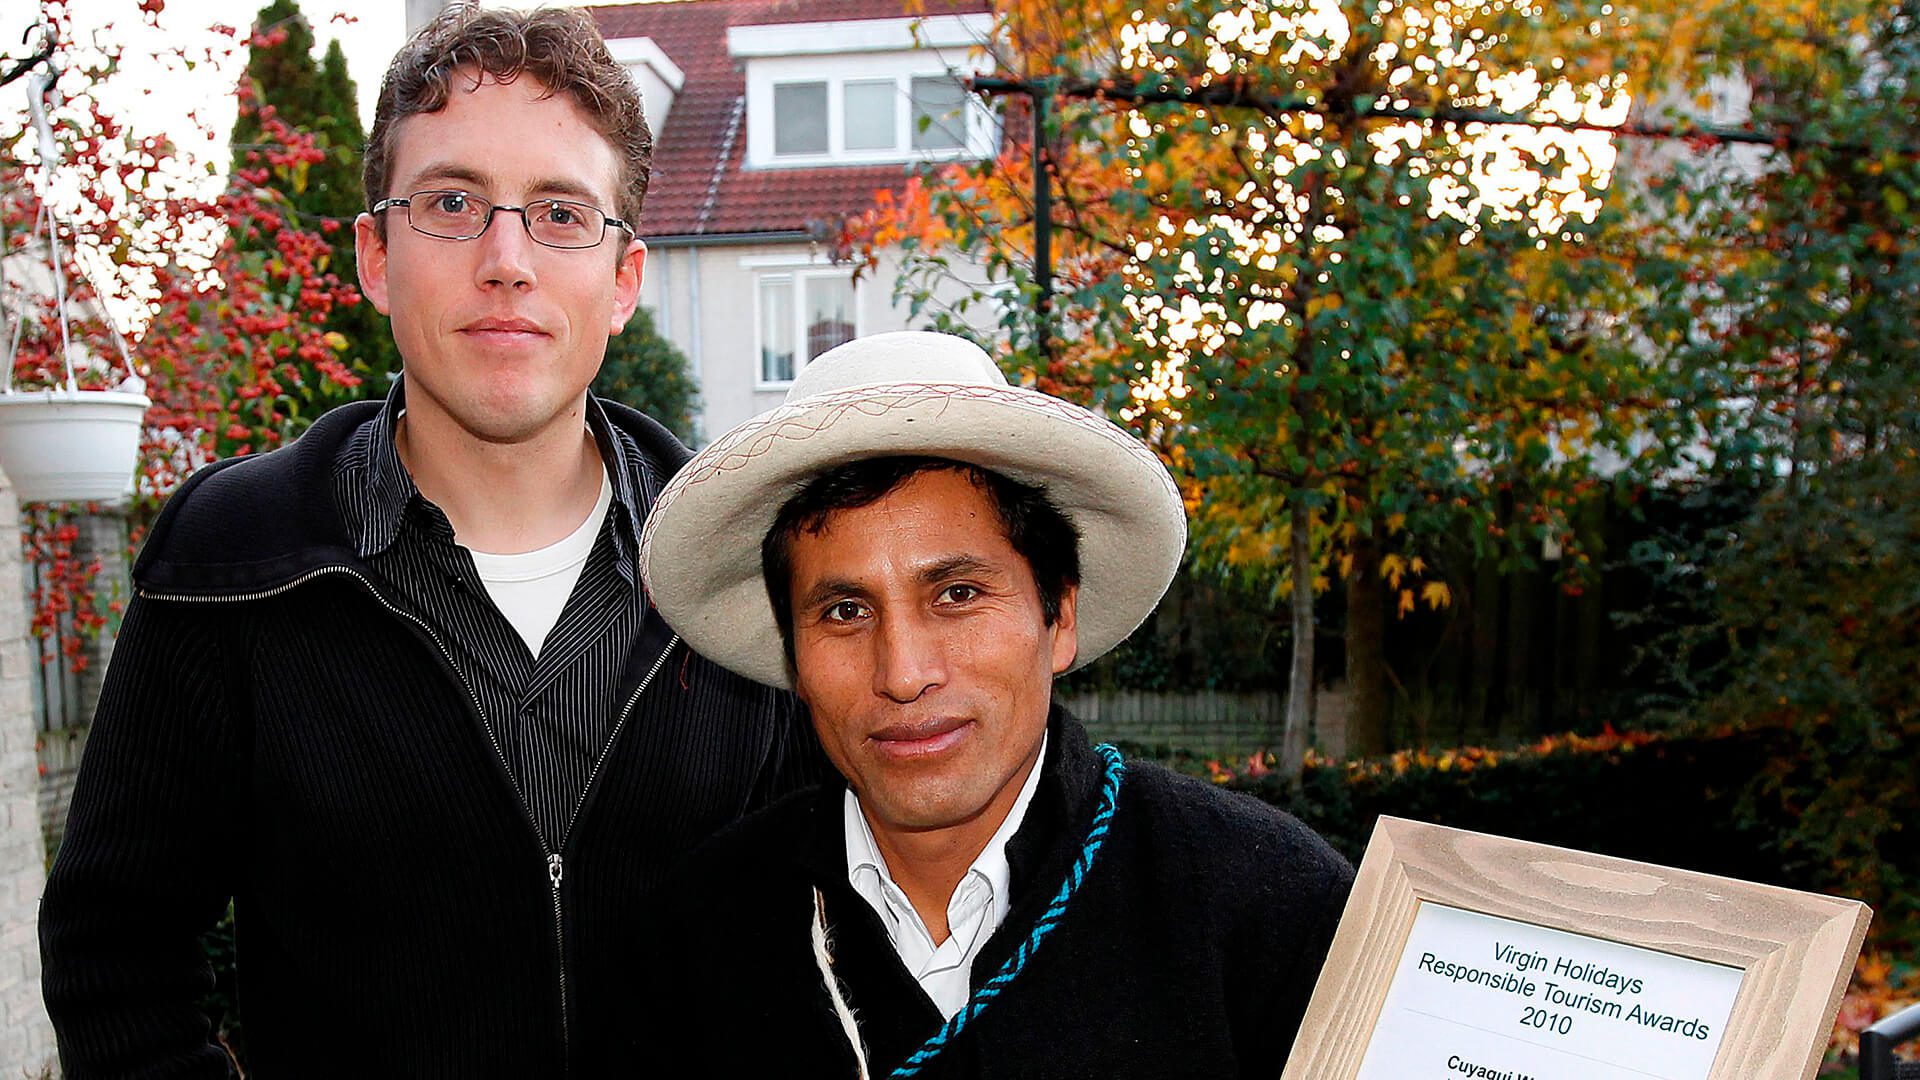 11Guido and Pablo in The Netherlands after receiving award | RESPONSible Travel Peru